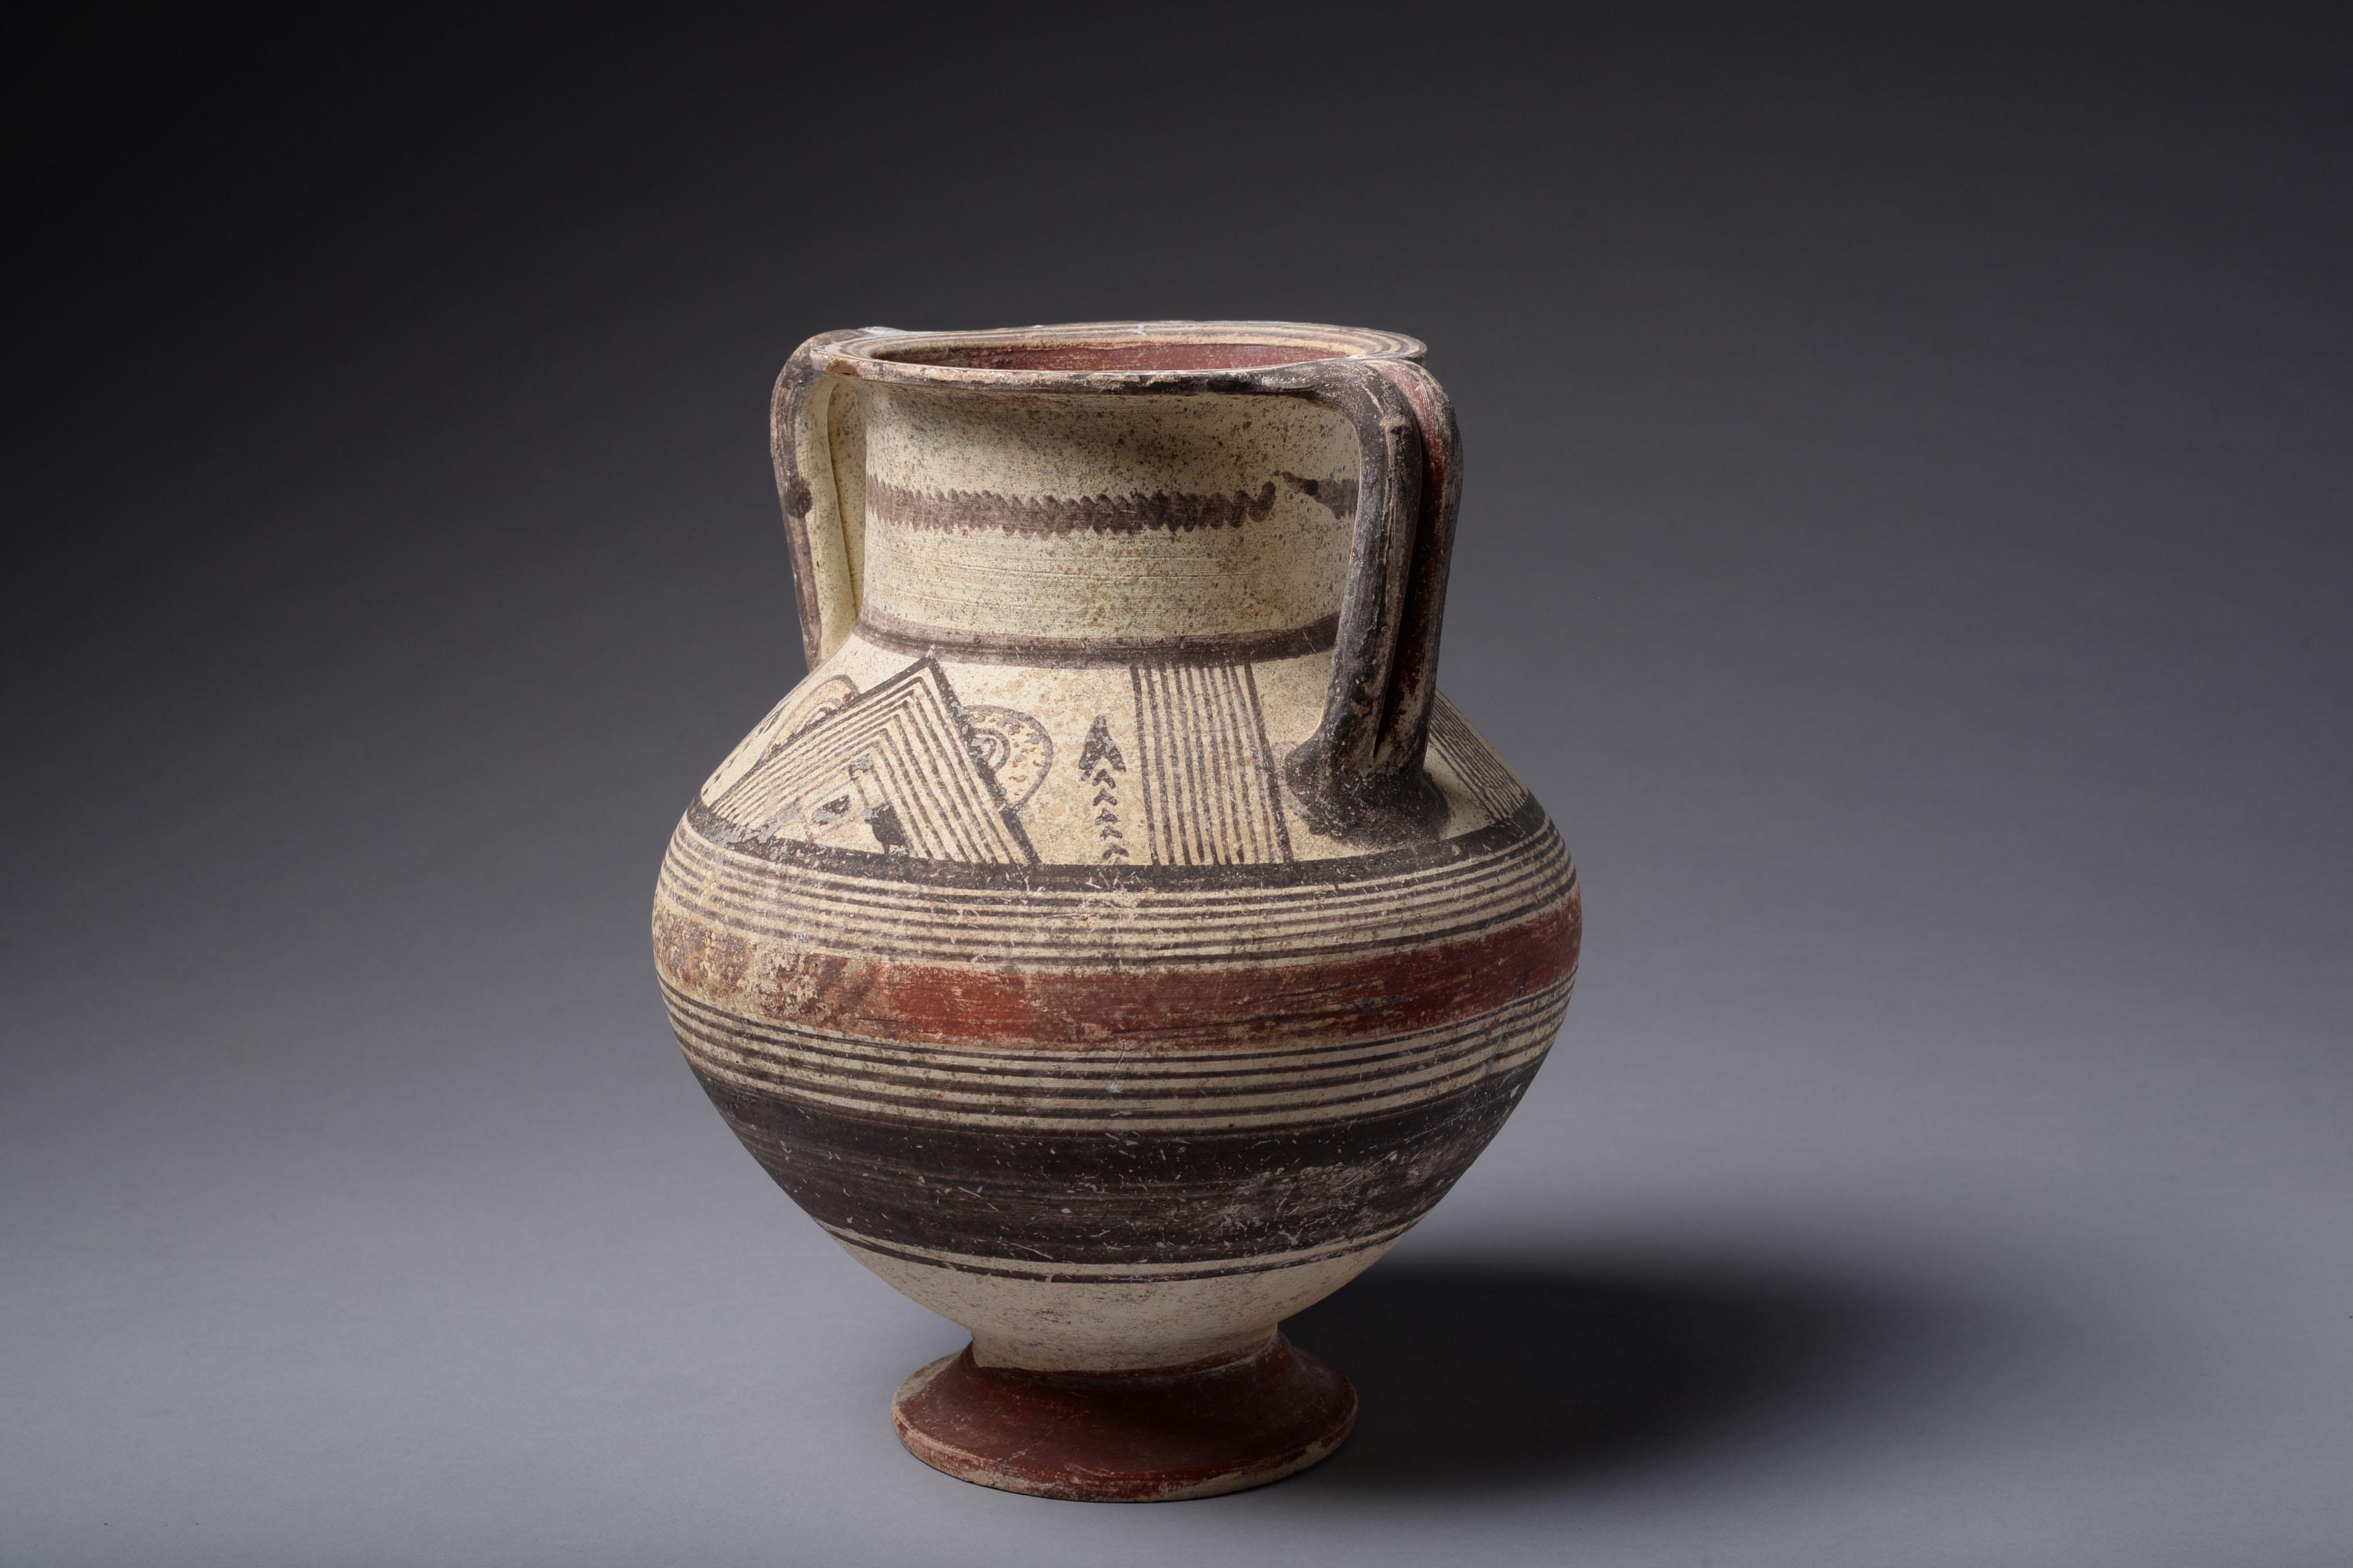 A well-preserved and richly decorated polychrome amphora, with arrows, checks, and bands of red and black paint. The herringbone decorations on the neck of the vessel probably represent abstract fish. This motif is more commonly found on the